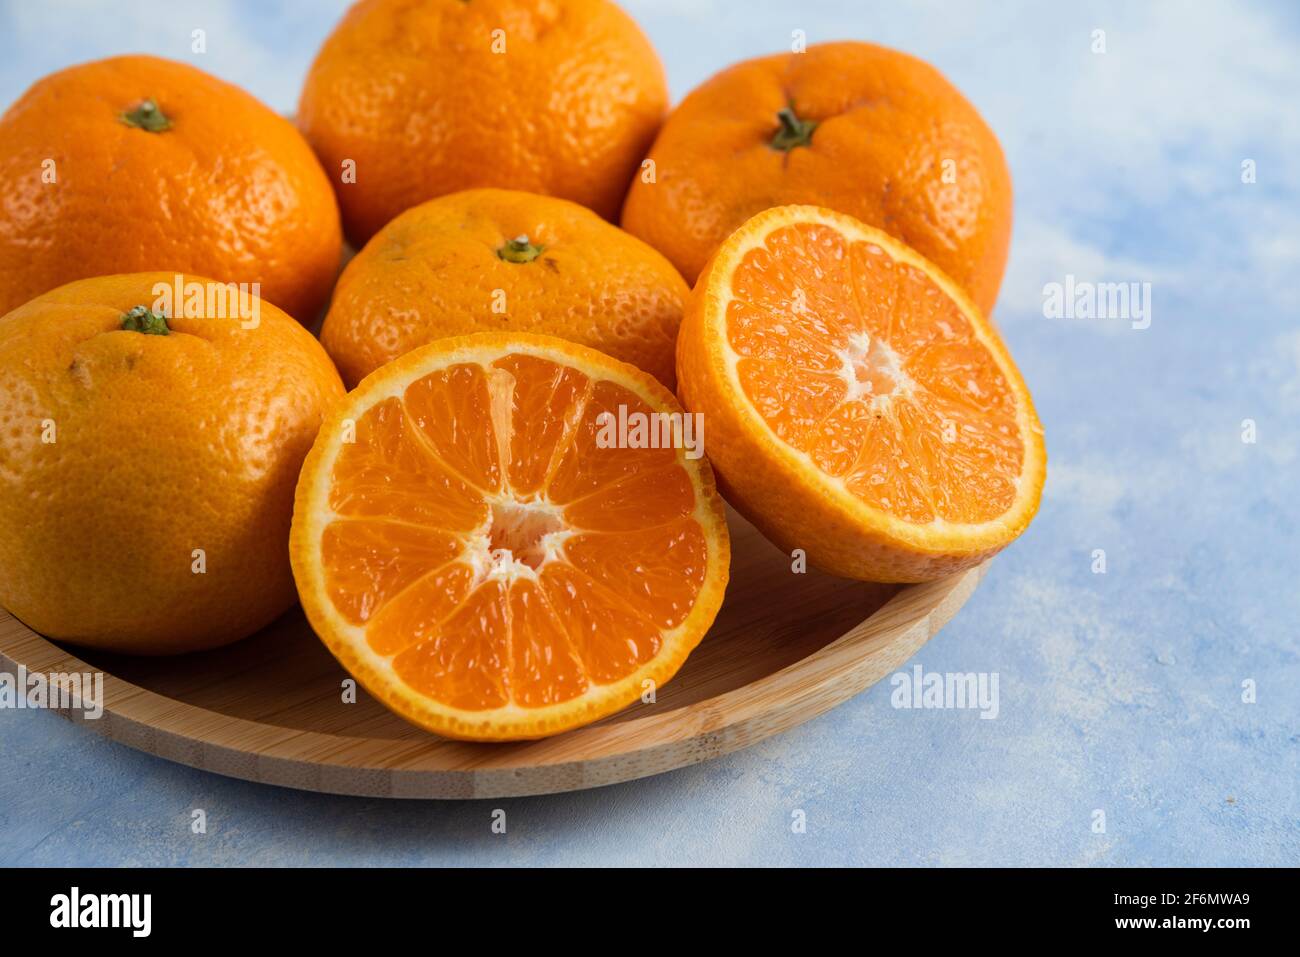 Close up photo of fresh mandarins on wooden plate Stock Photo